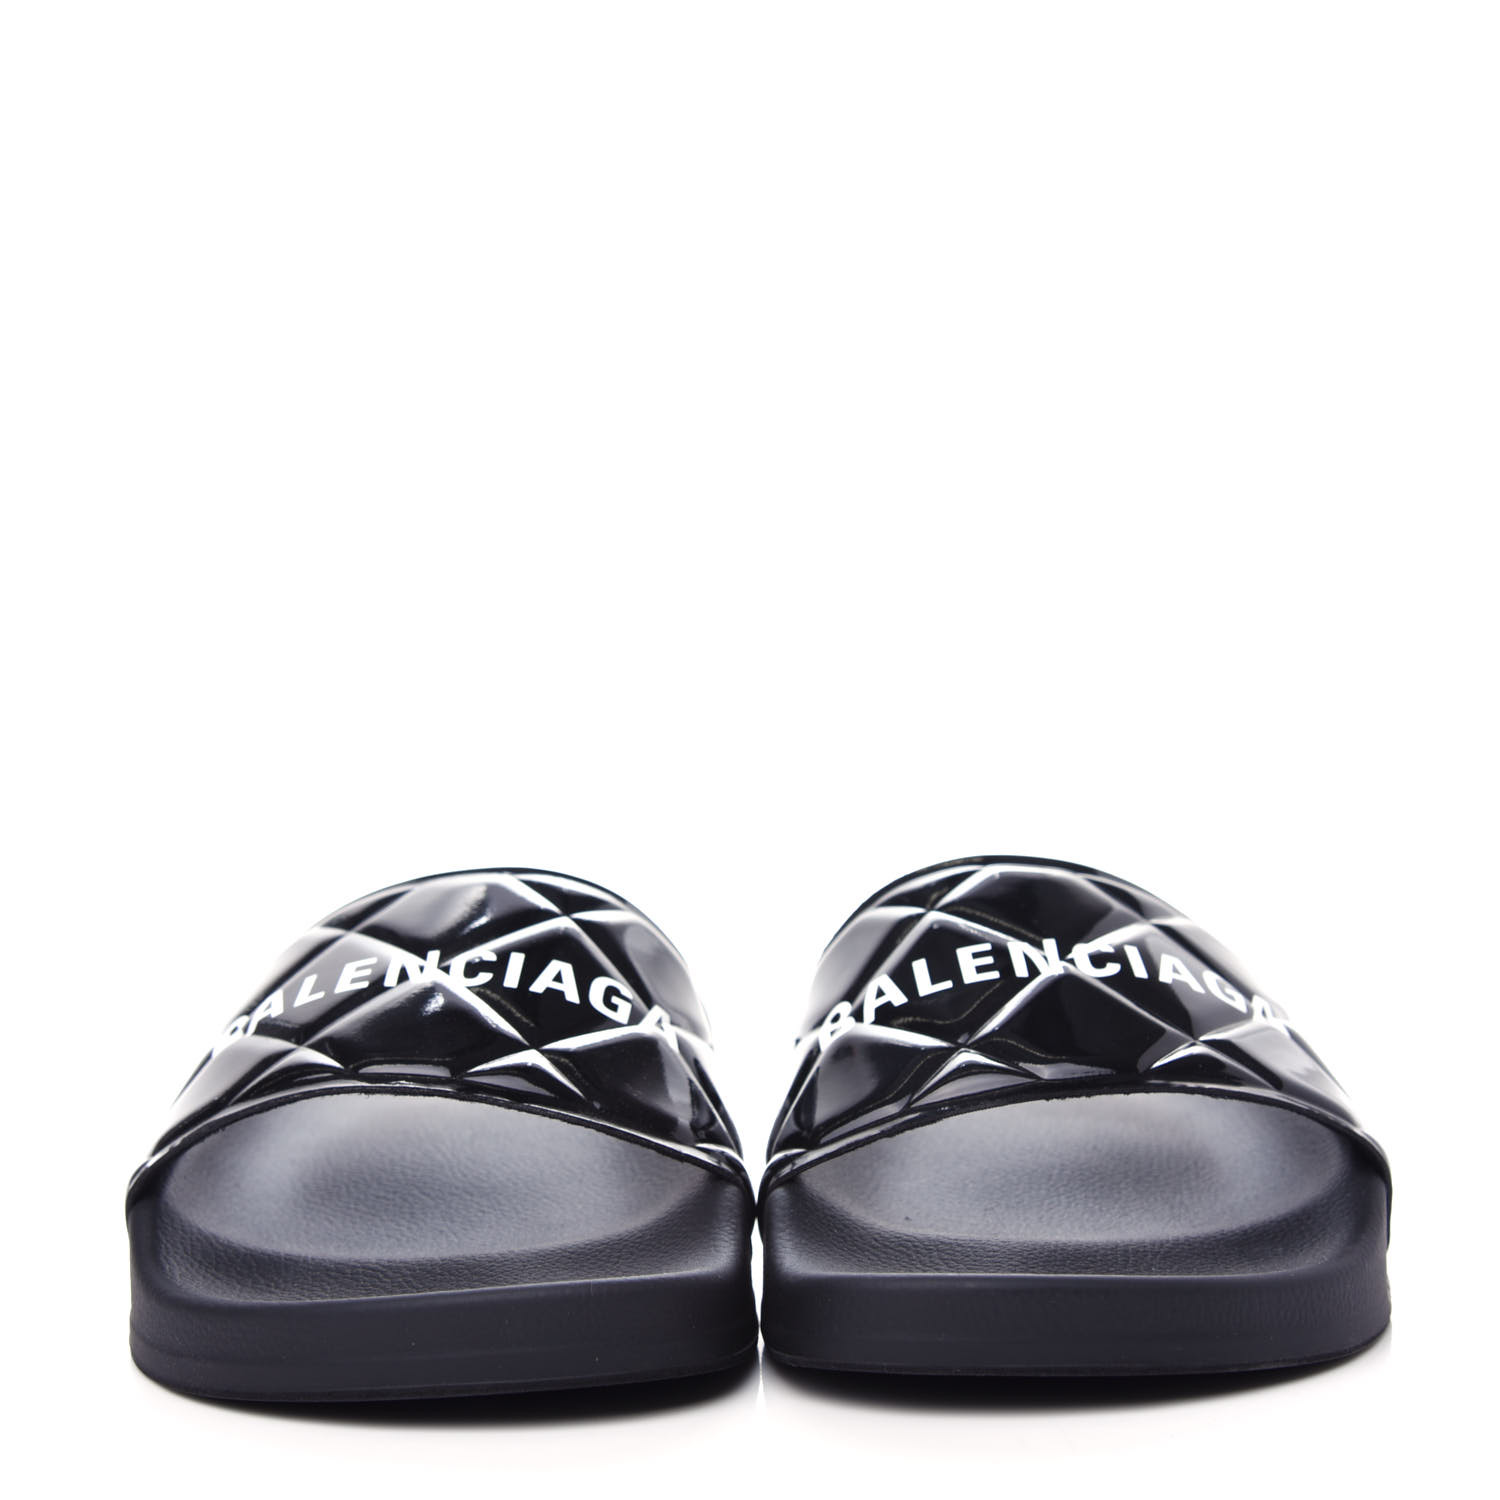 BALENCIAGA Rubber Patent Quilted Logo Slide Sandals 36 Black White ...